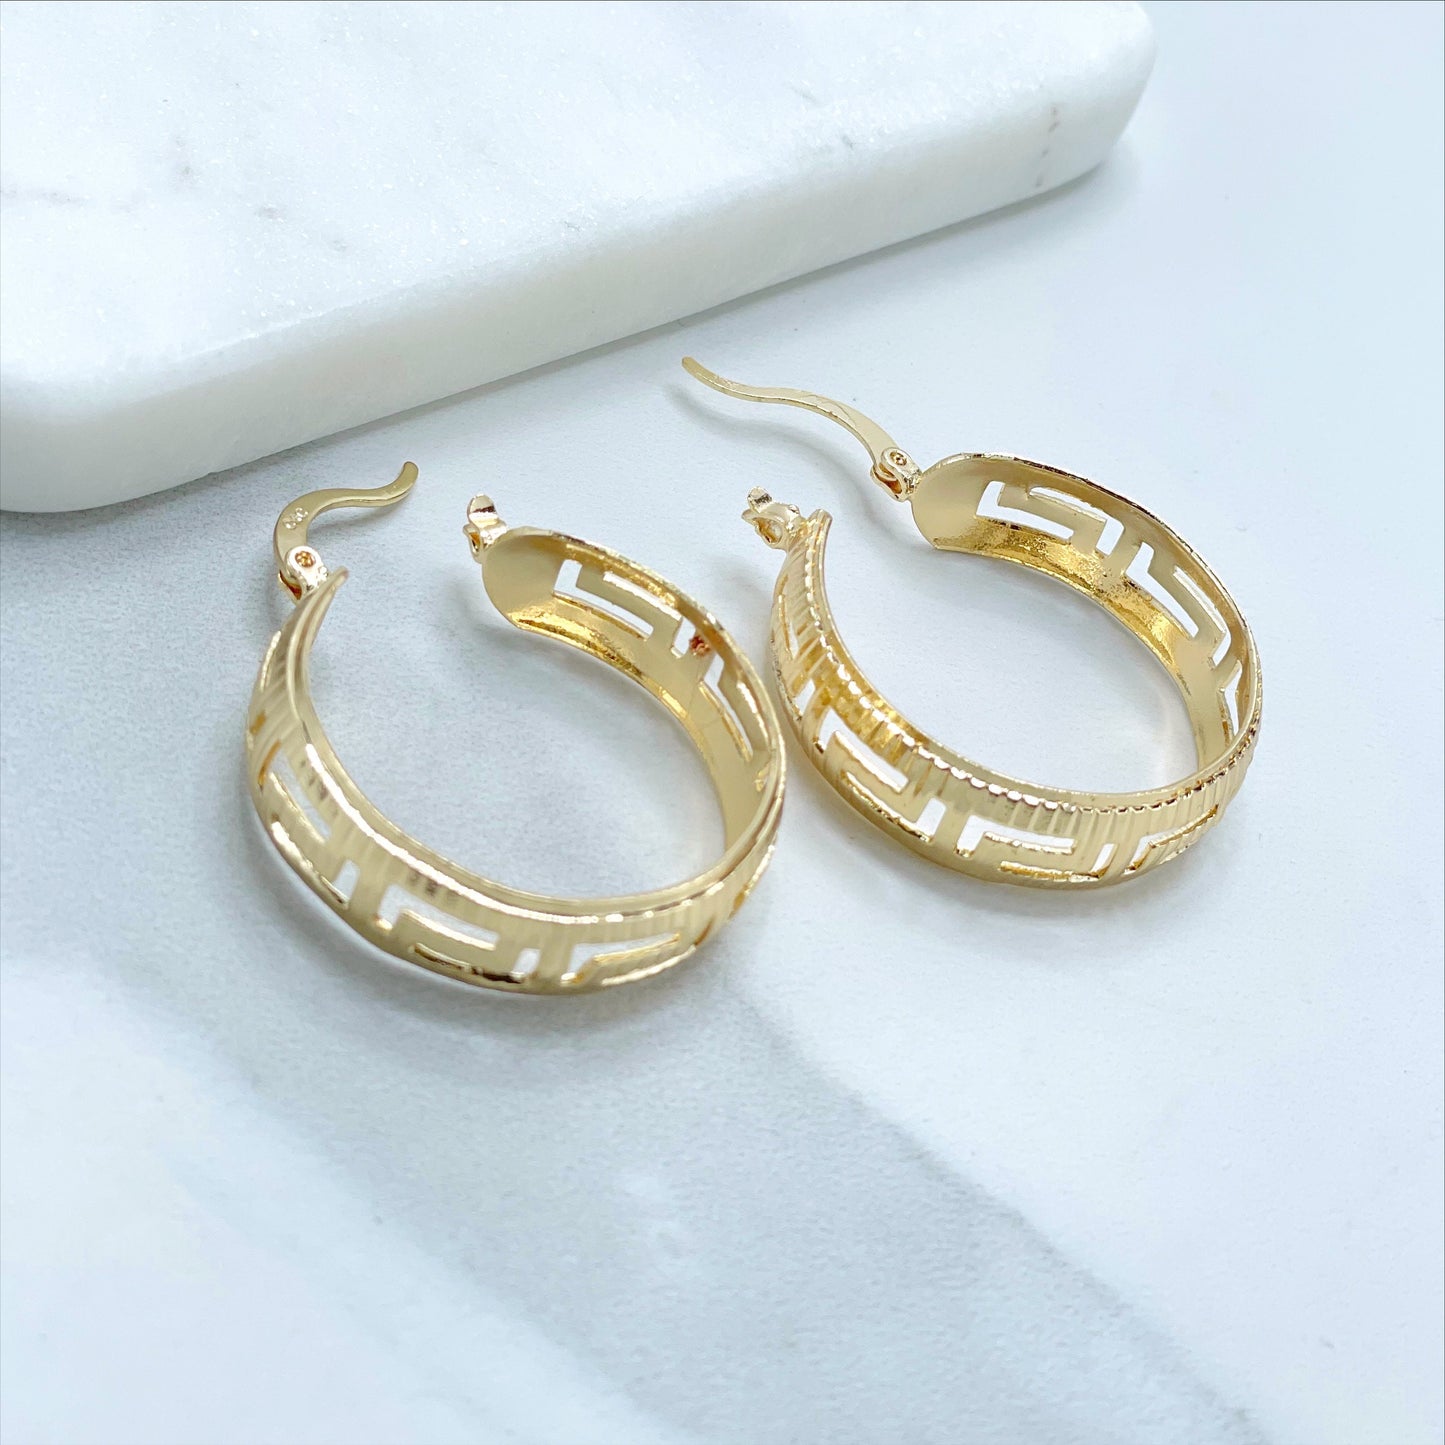 18k Gold Filled 30mm Z Modern Design Hoops Earrings, Wholesale and Jewelry Supplies